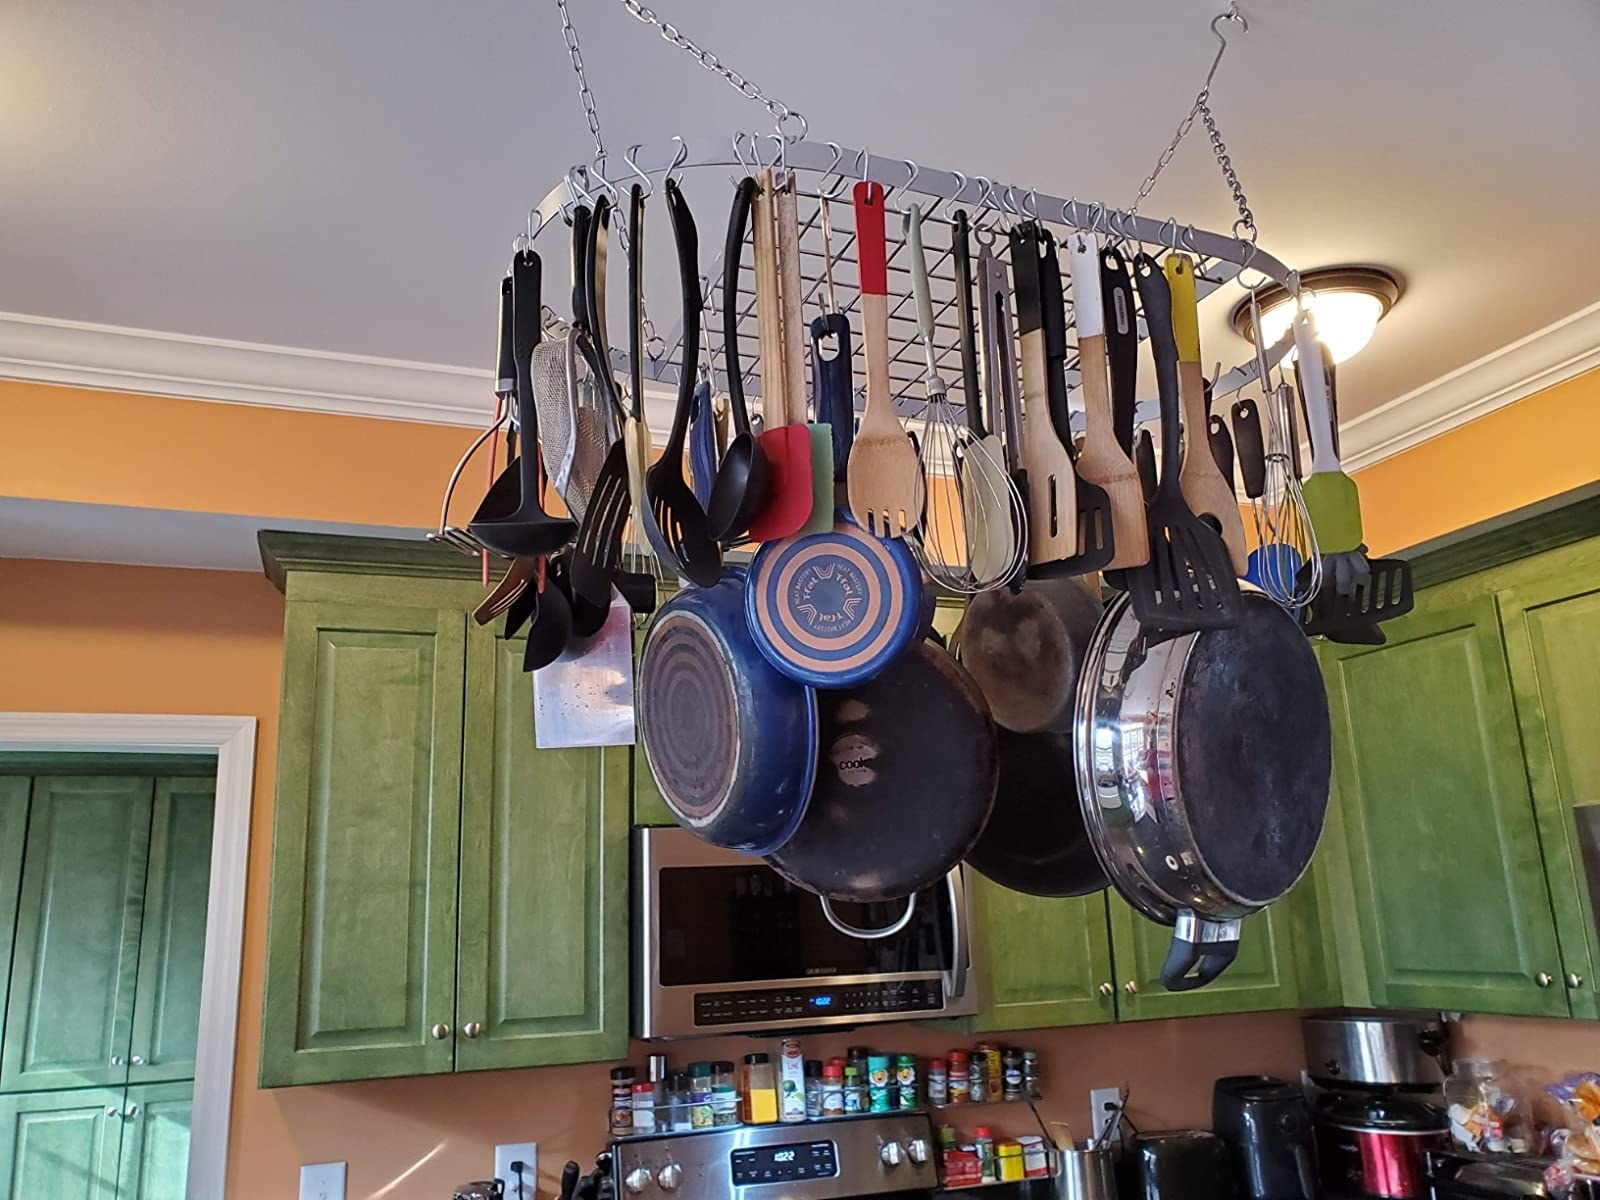 a ceiling rack holding pots, pans, and kitchen tools